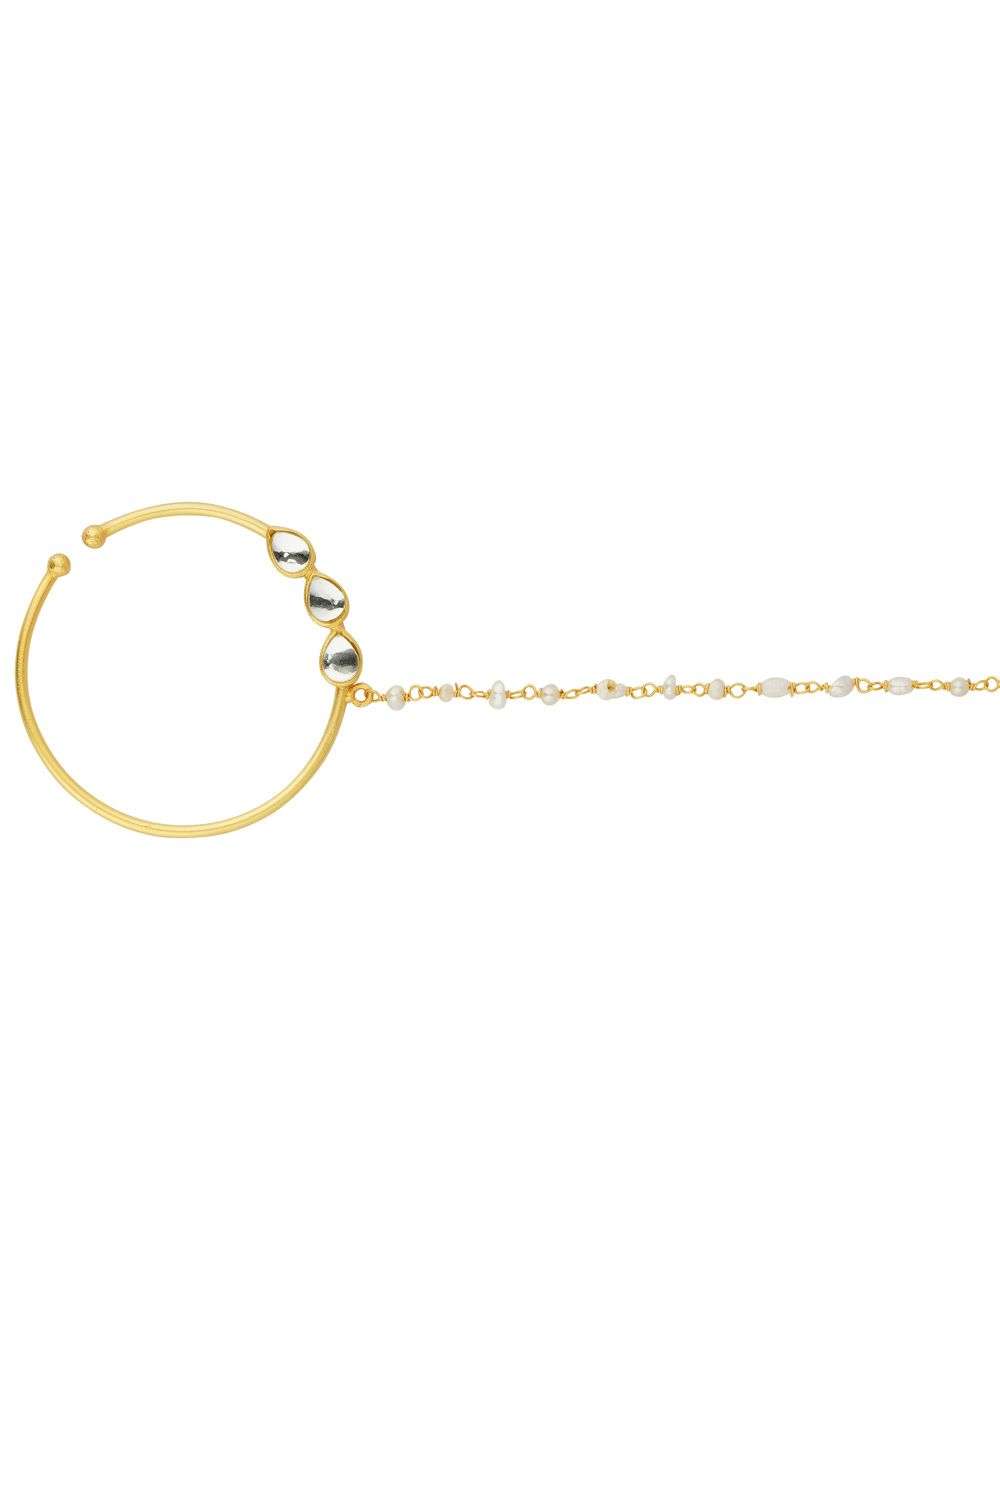 Simple Gold Nose Ring 0.140 grams | Pure Gold Jeweller